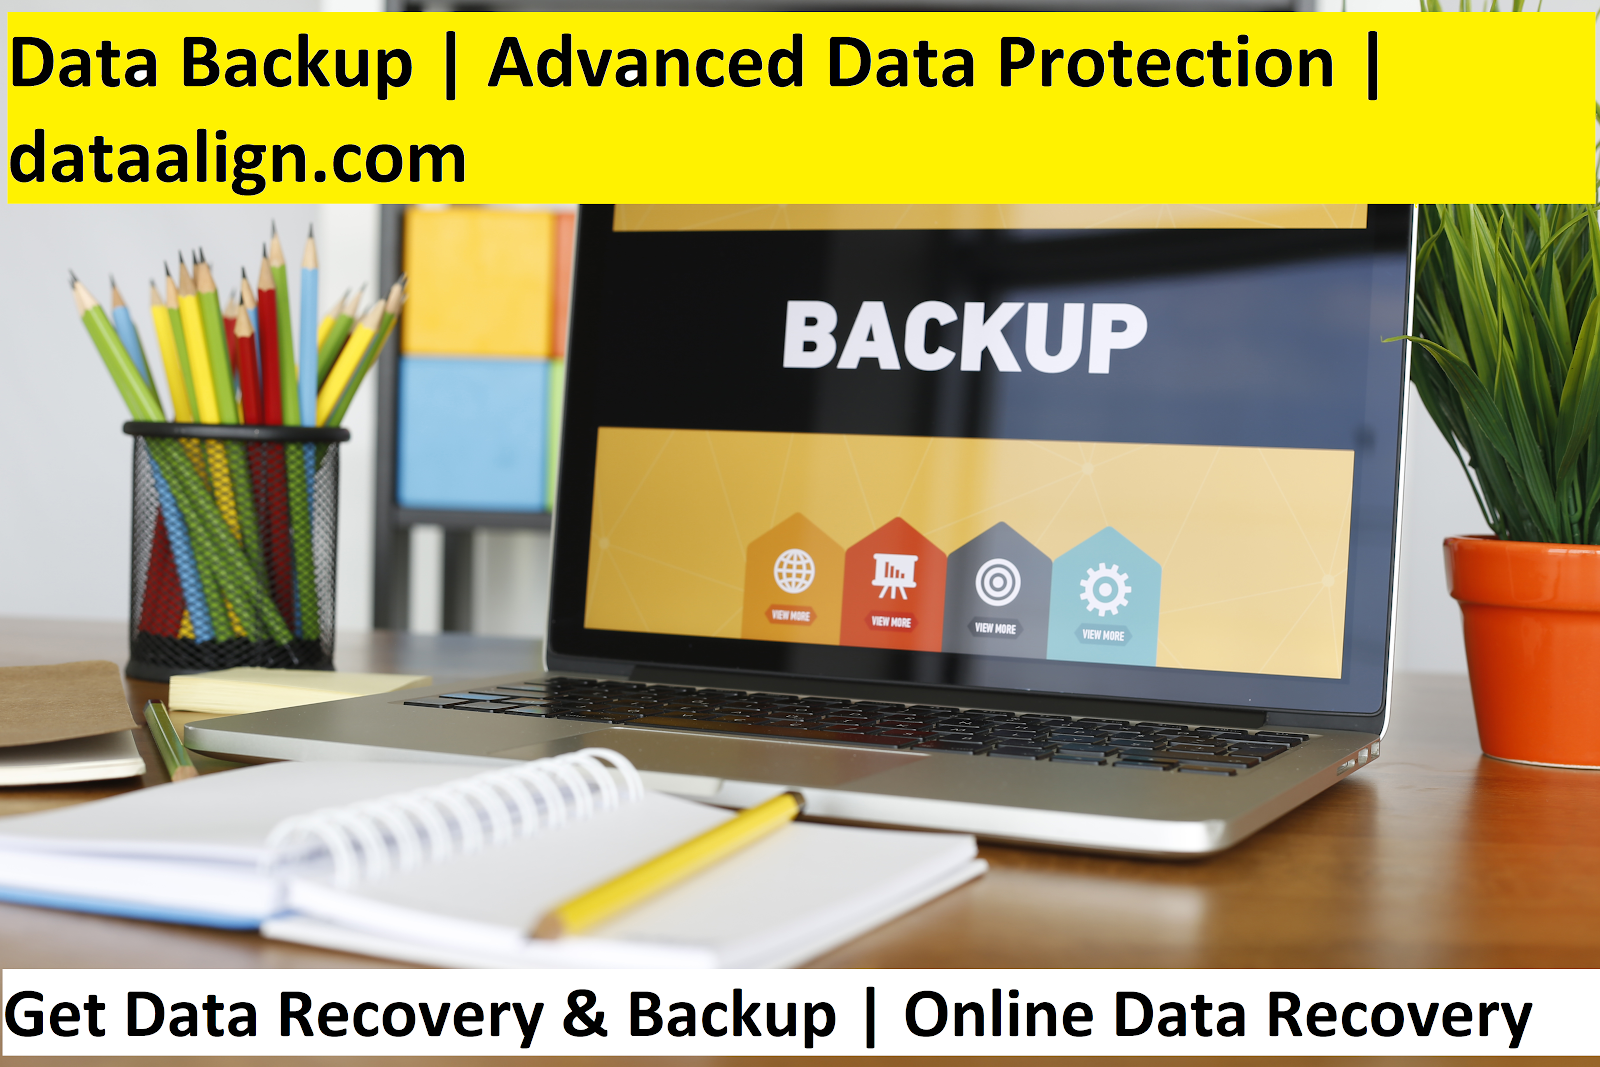 Step by step solution to save your data on online cloud backup